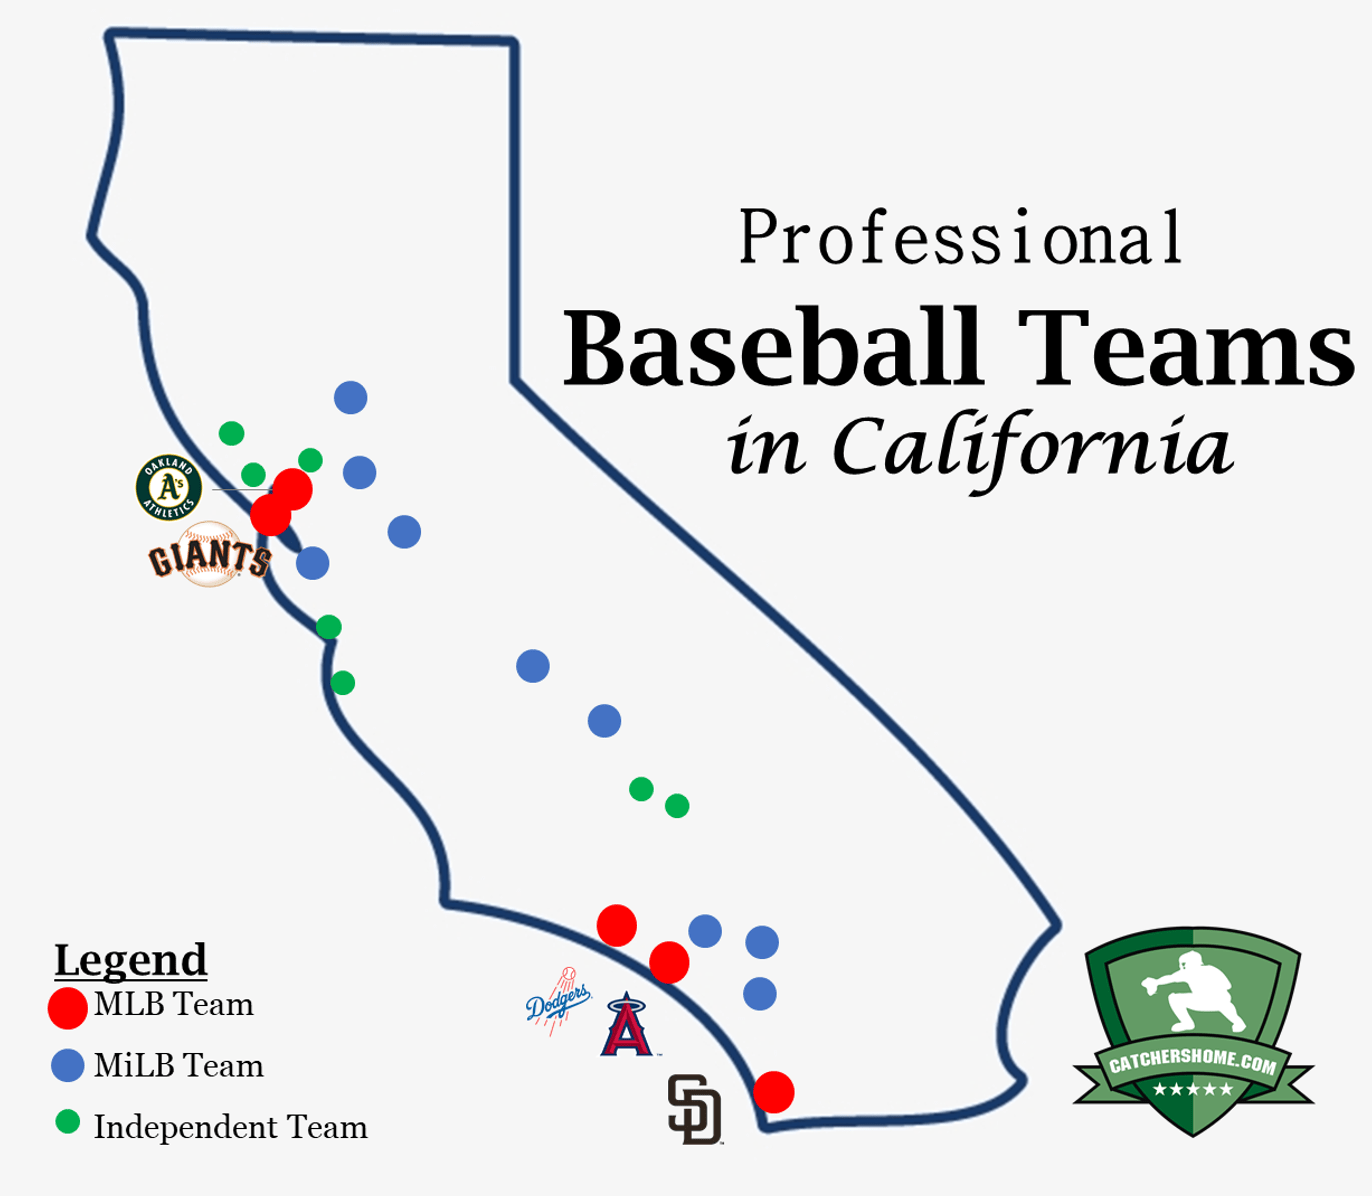 how many baseball teams in california are there